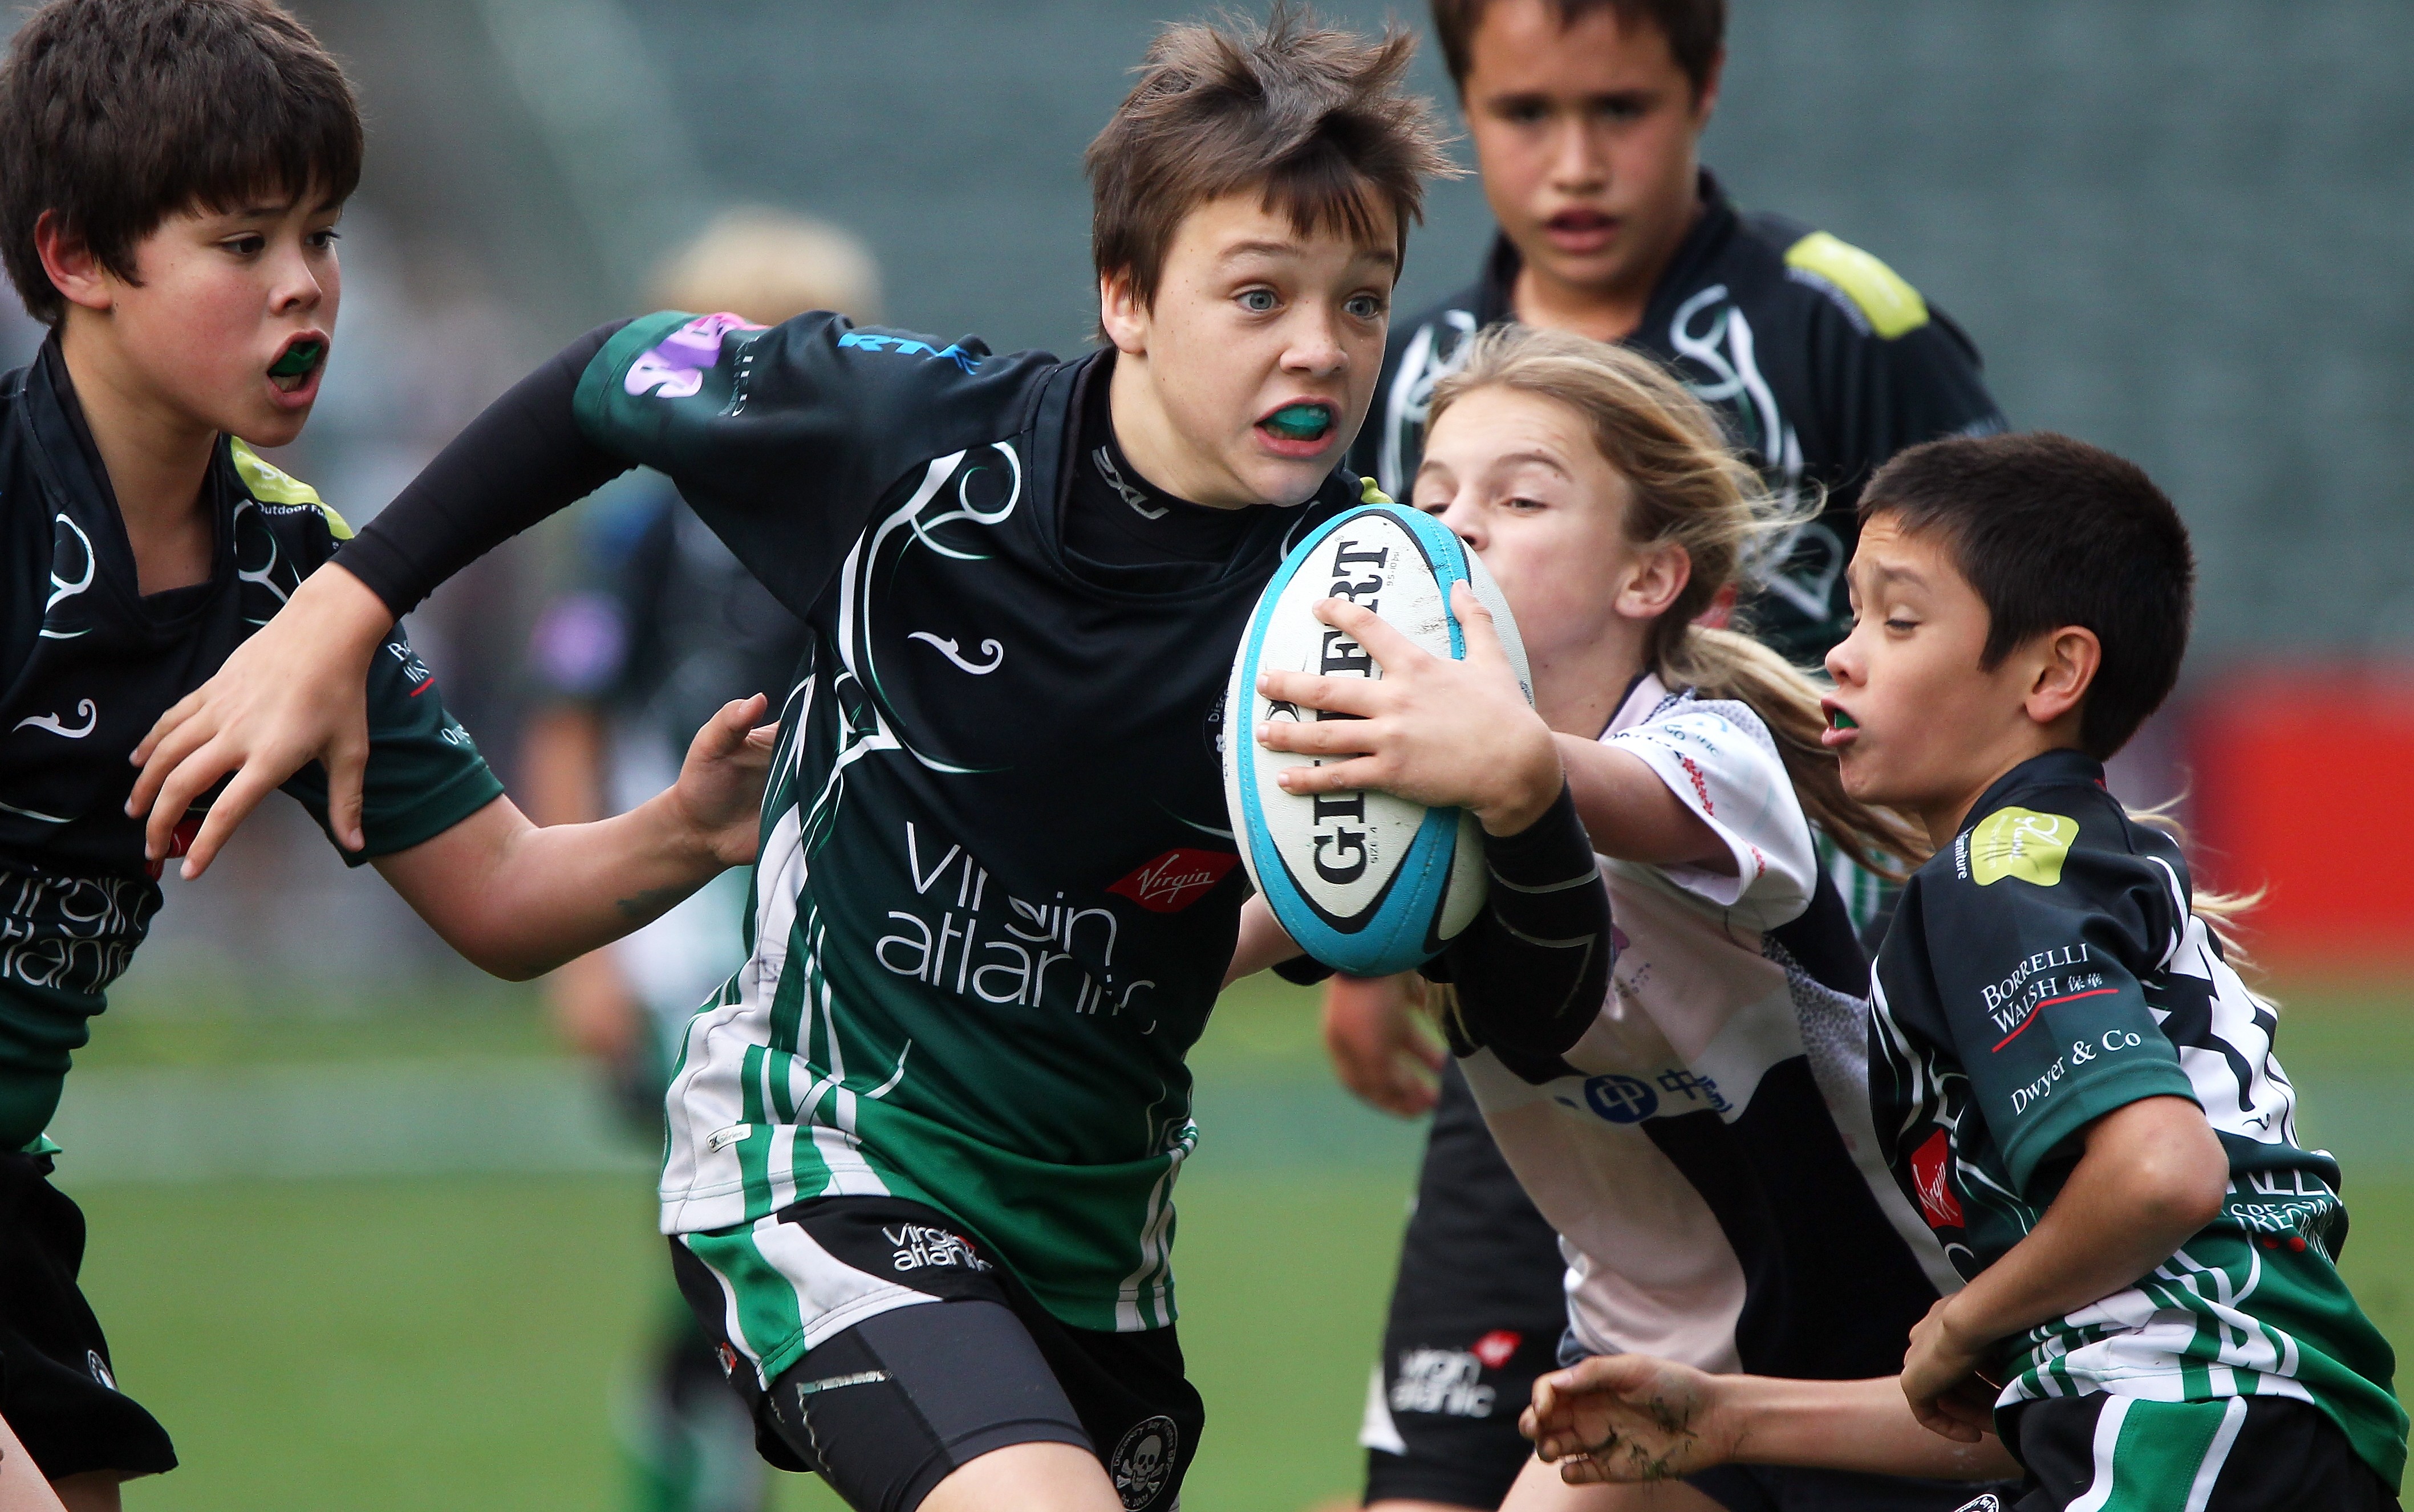 Hong Kong kids in action at the Sevens – but if some parents get there way, “harmful contact” would be banned from youth rugby. Photo: Nora Tam